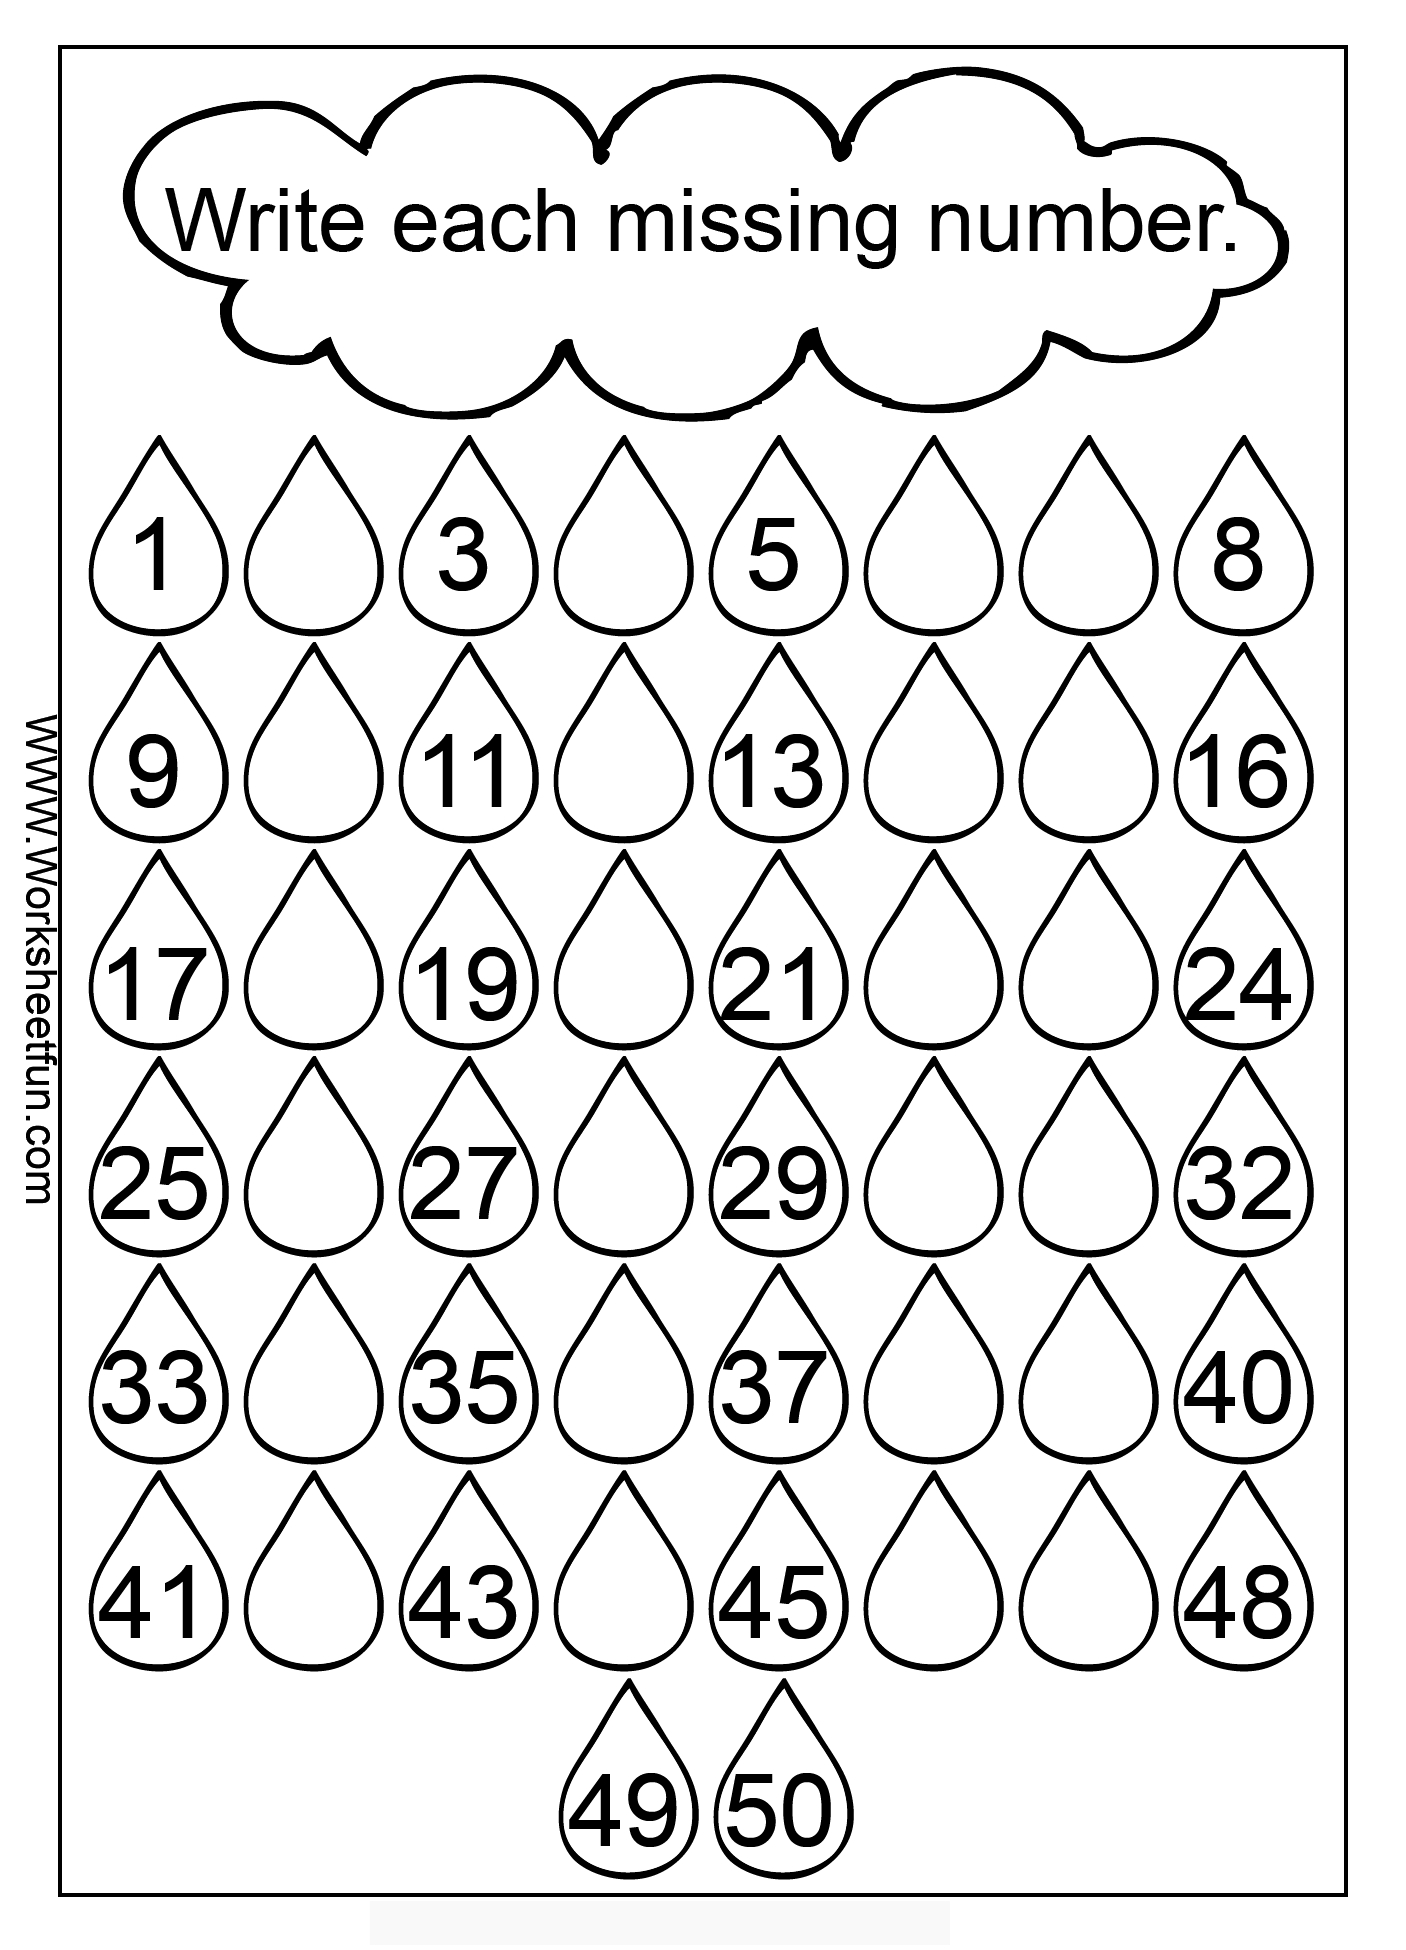 Missing Numbers 1-50 - 3 Worksheets. Sight Has Lots Of Good Math - Free Printable Missing Number Worksheets